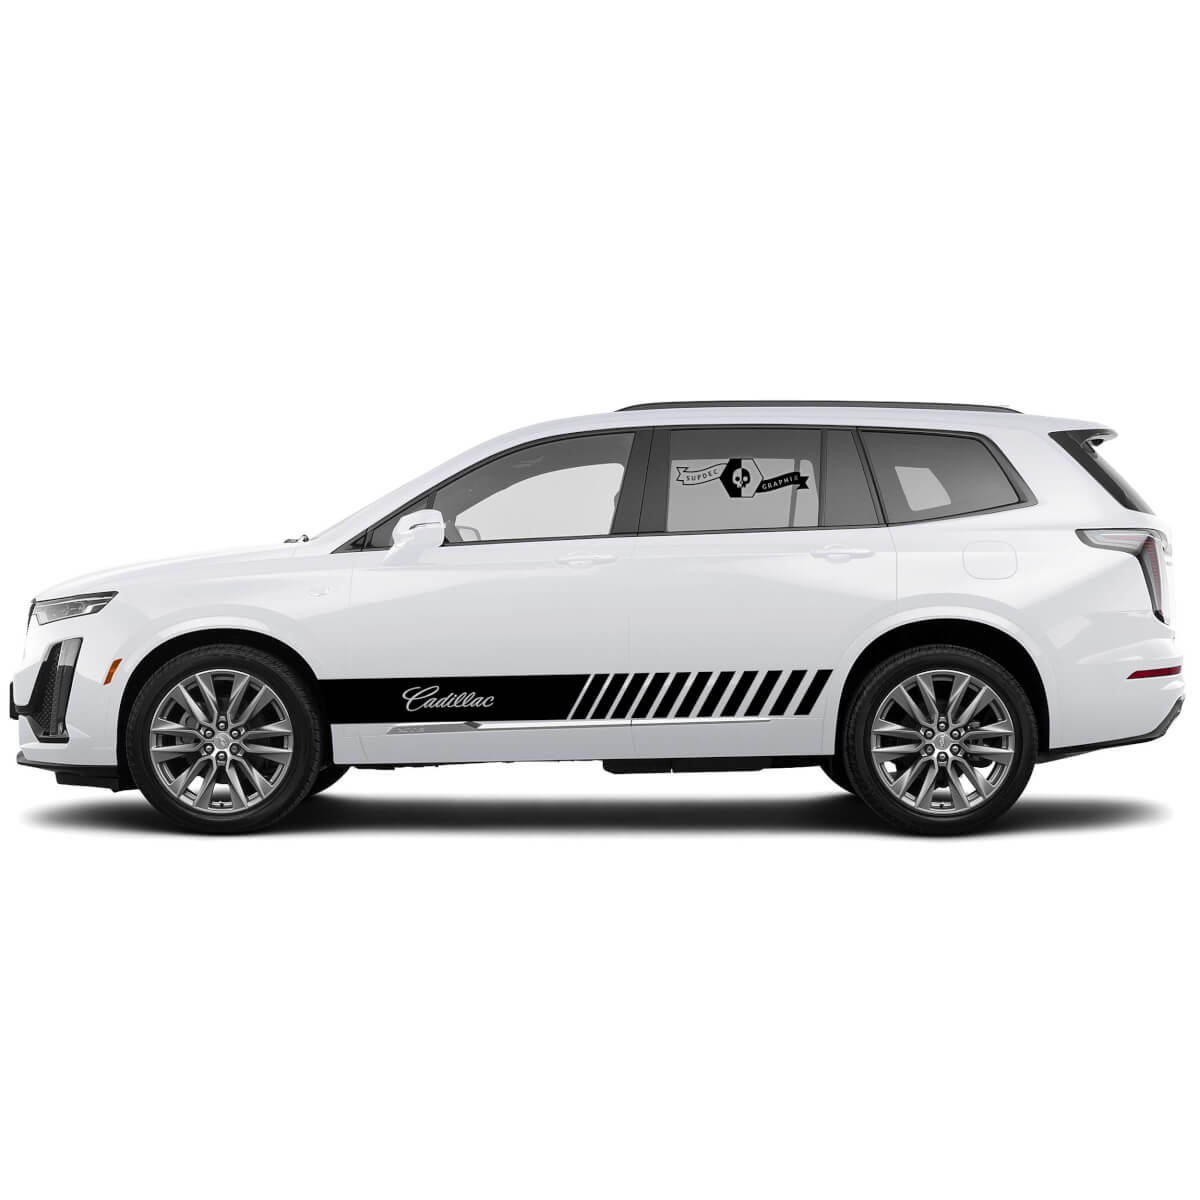 2 New Decal Doors Classic Sticker Lines Classic Stripe for Cadillac XT6
